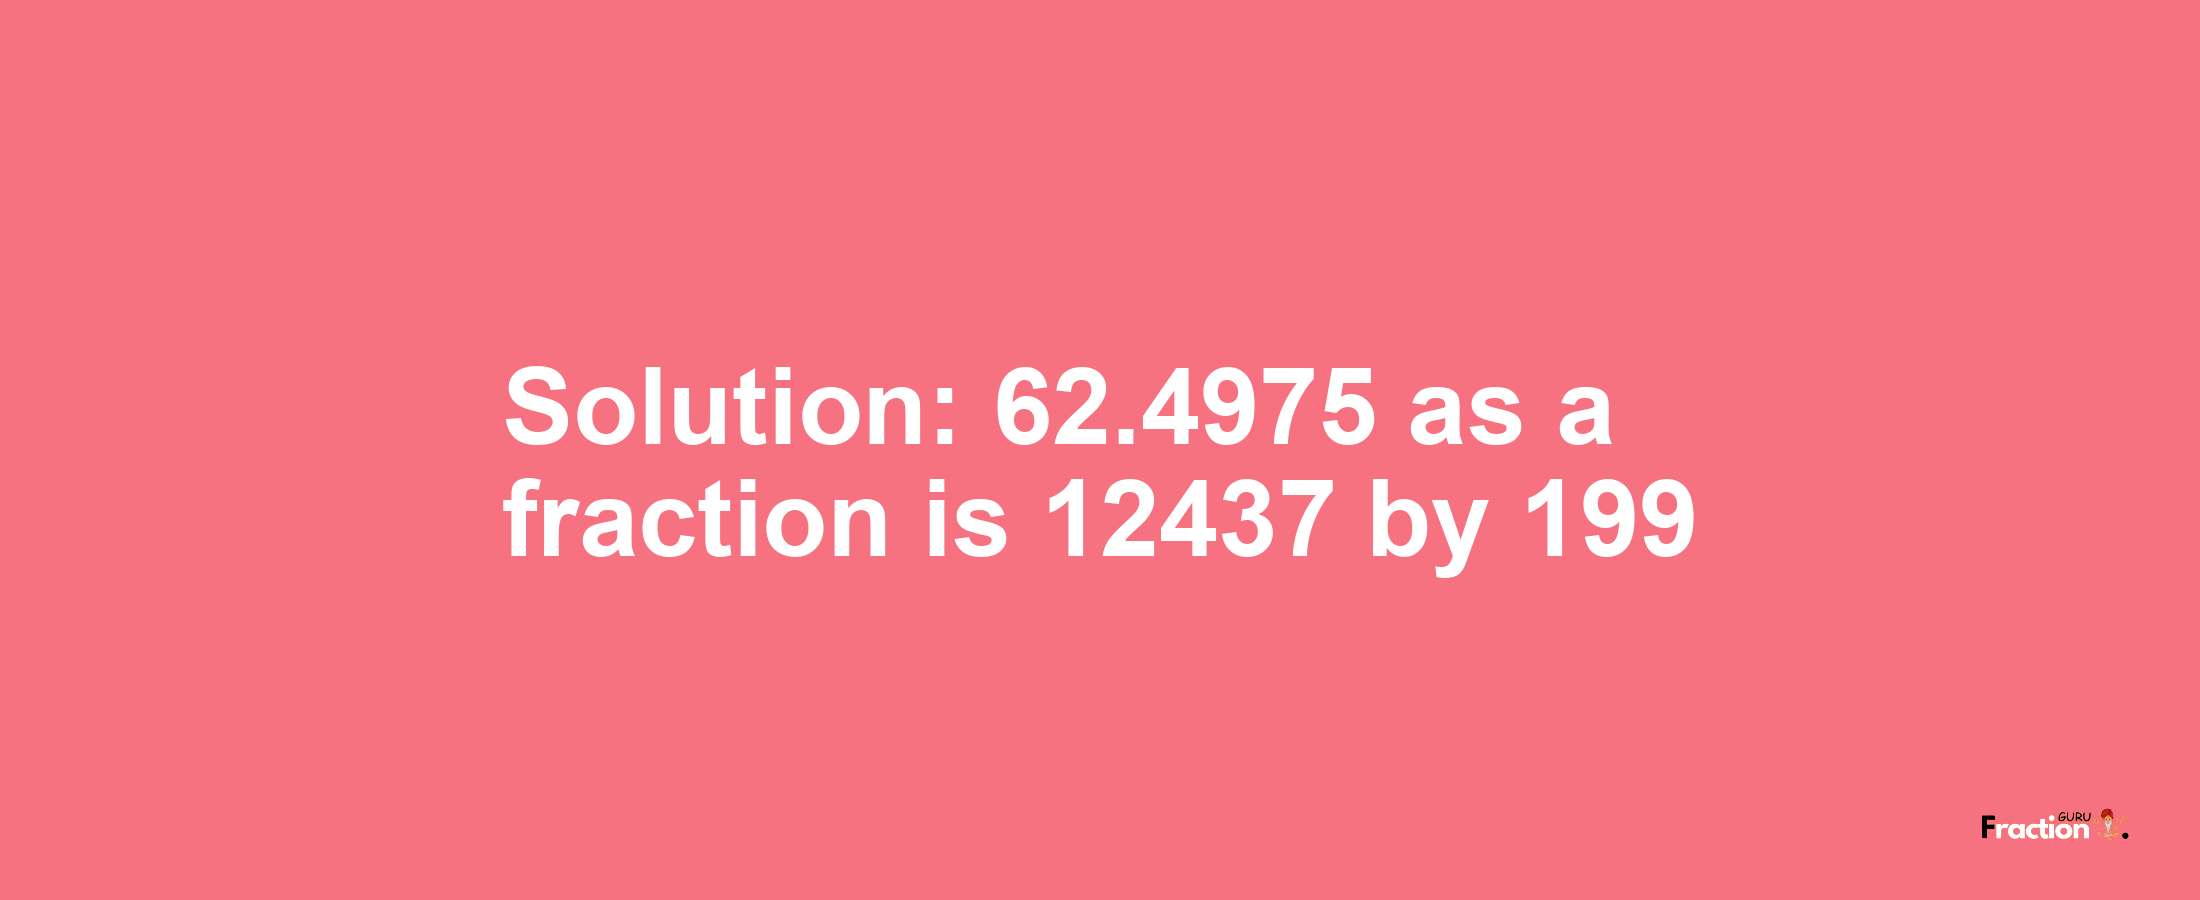 Solution:62.4975 as a fraction is 12437/199